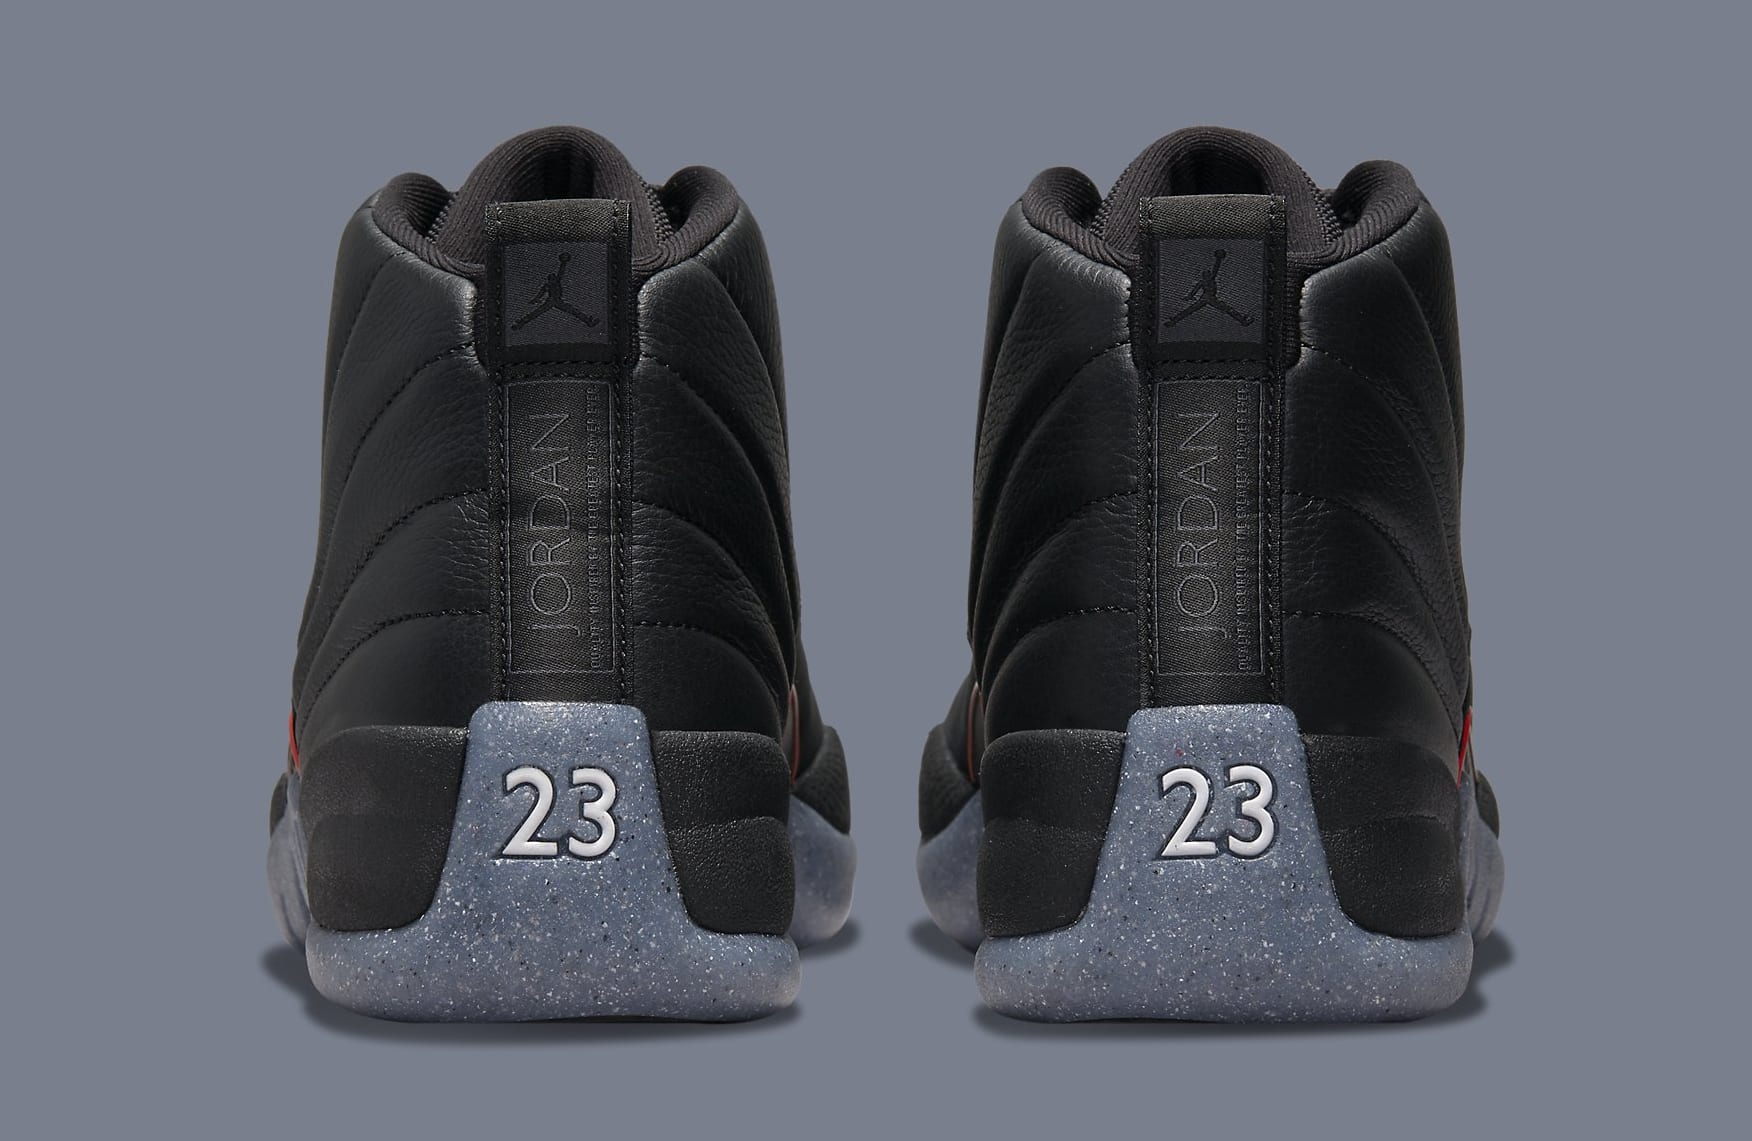 Utility' Air Jordan 12s Are Dropping This Month